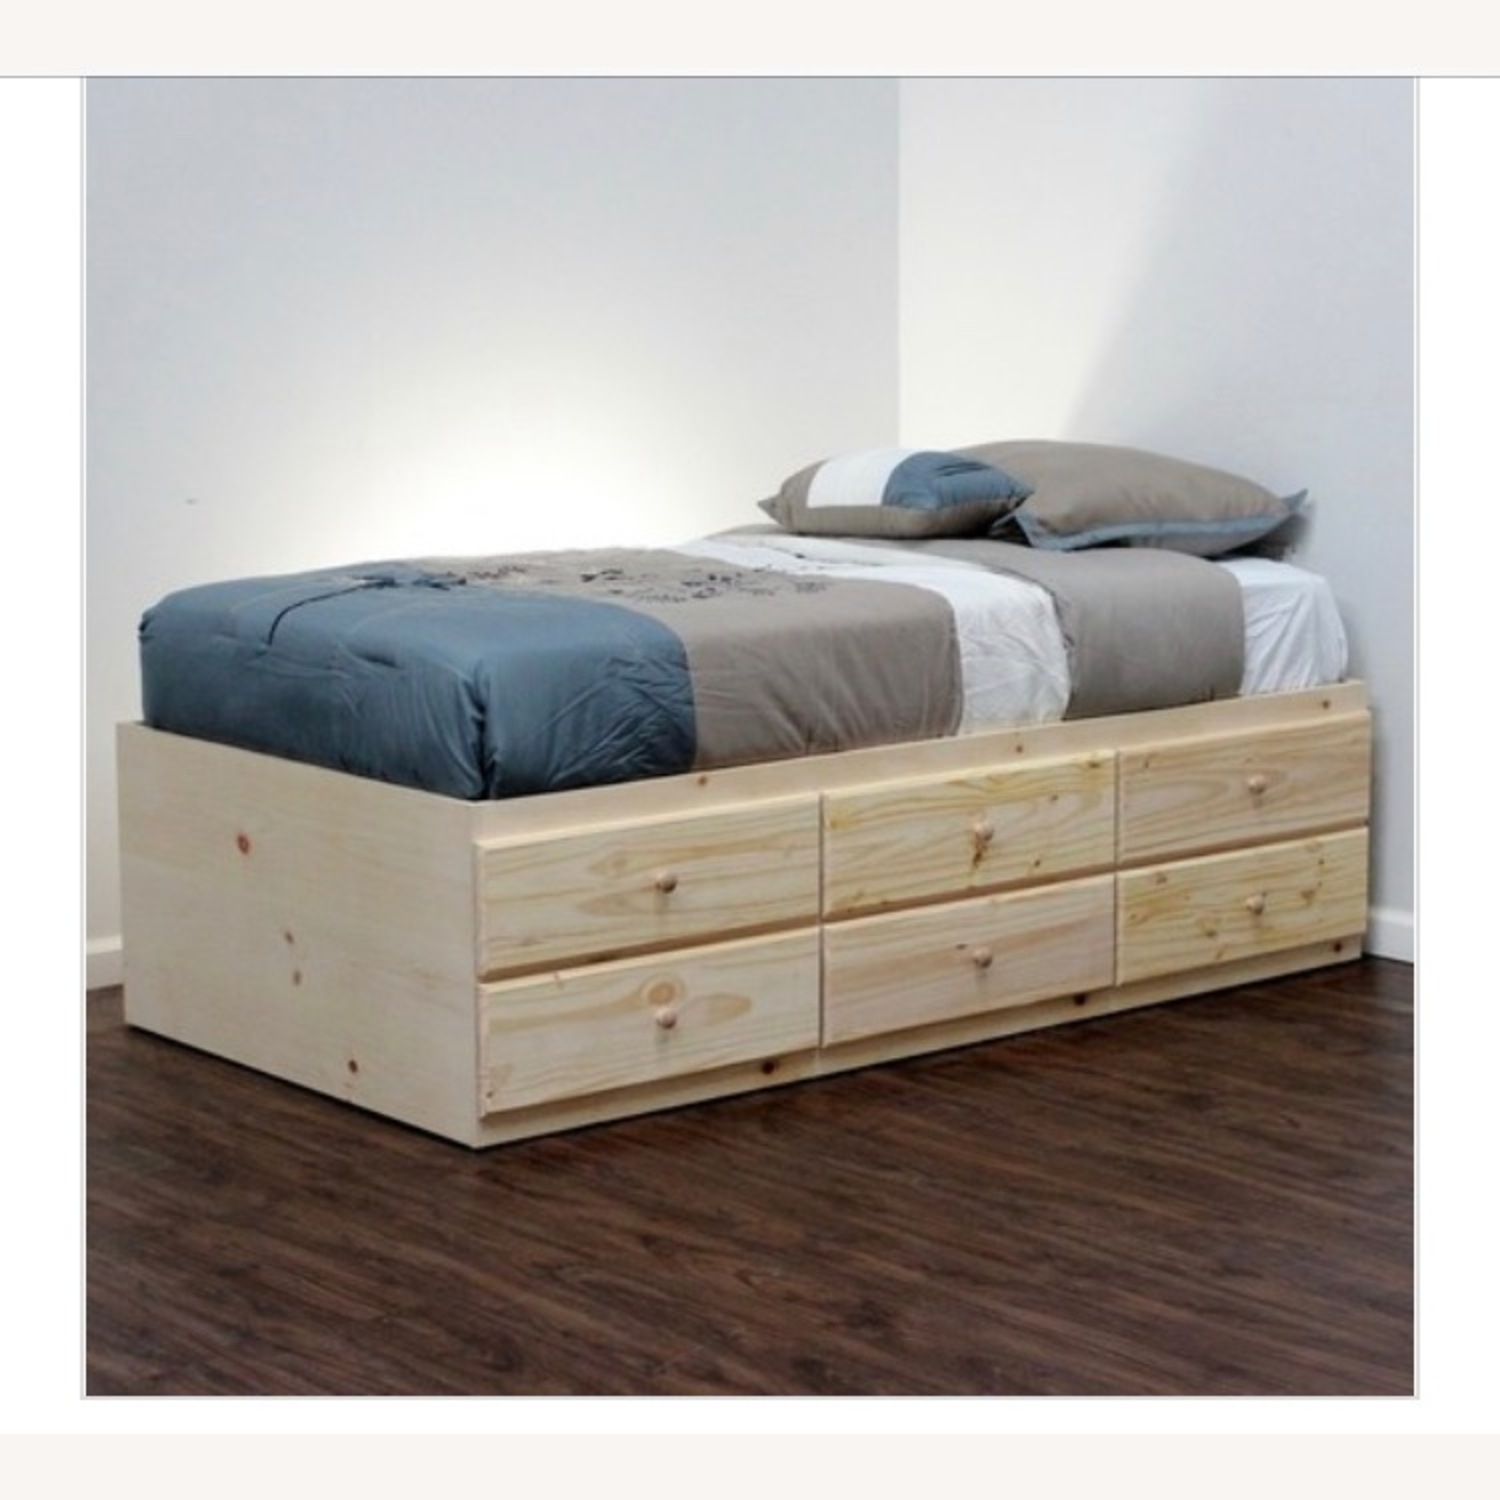 Bed With Storage Underneath Visualhunt, Twin Bed With Drawers Under